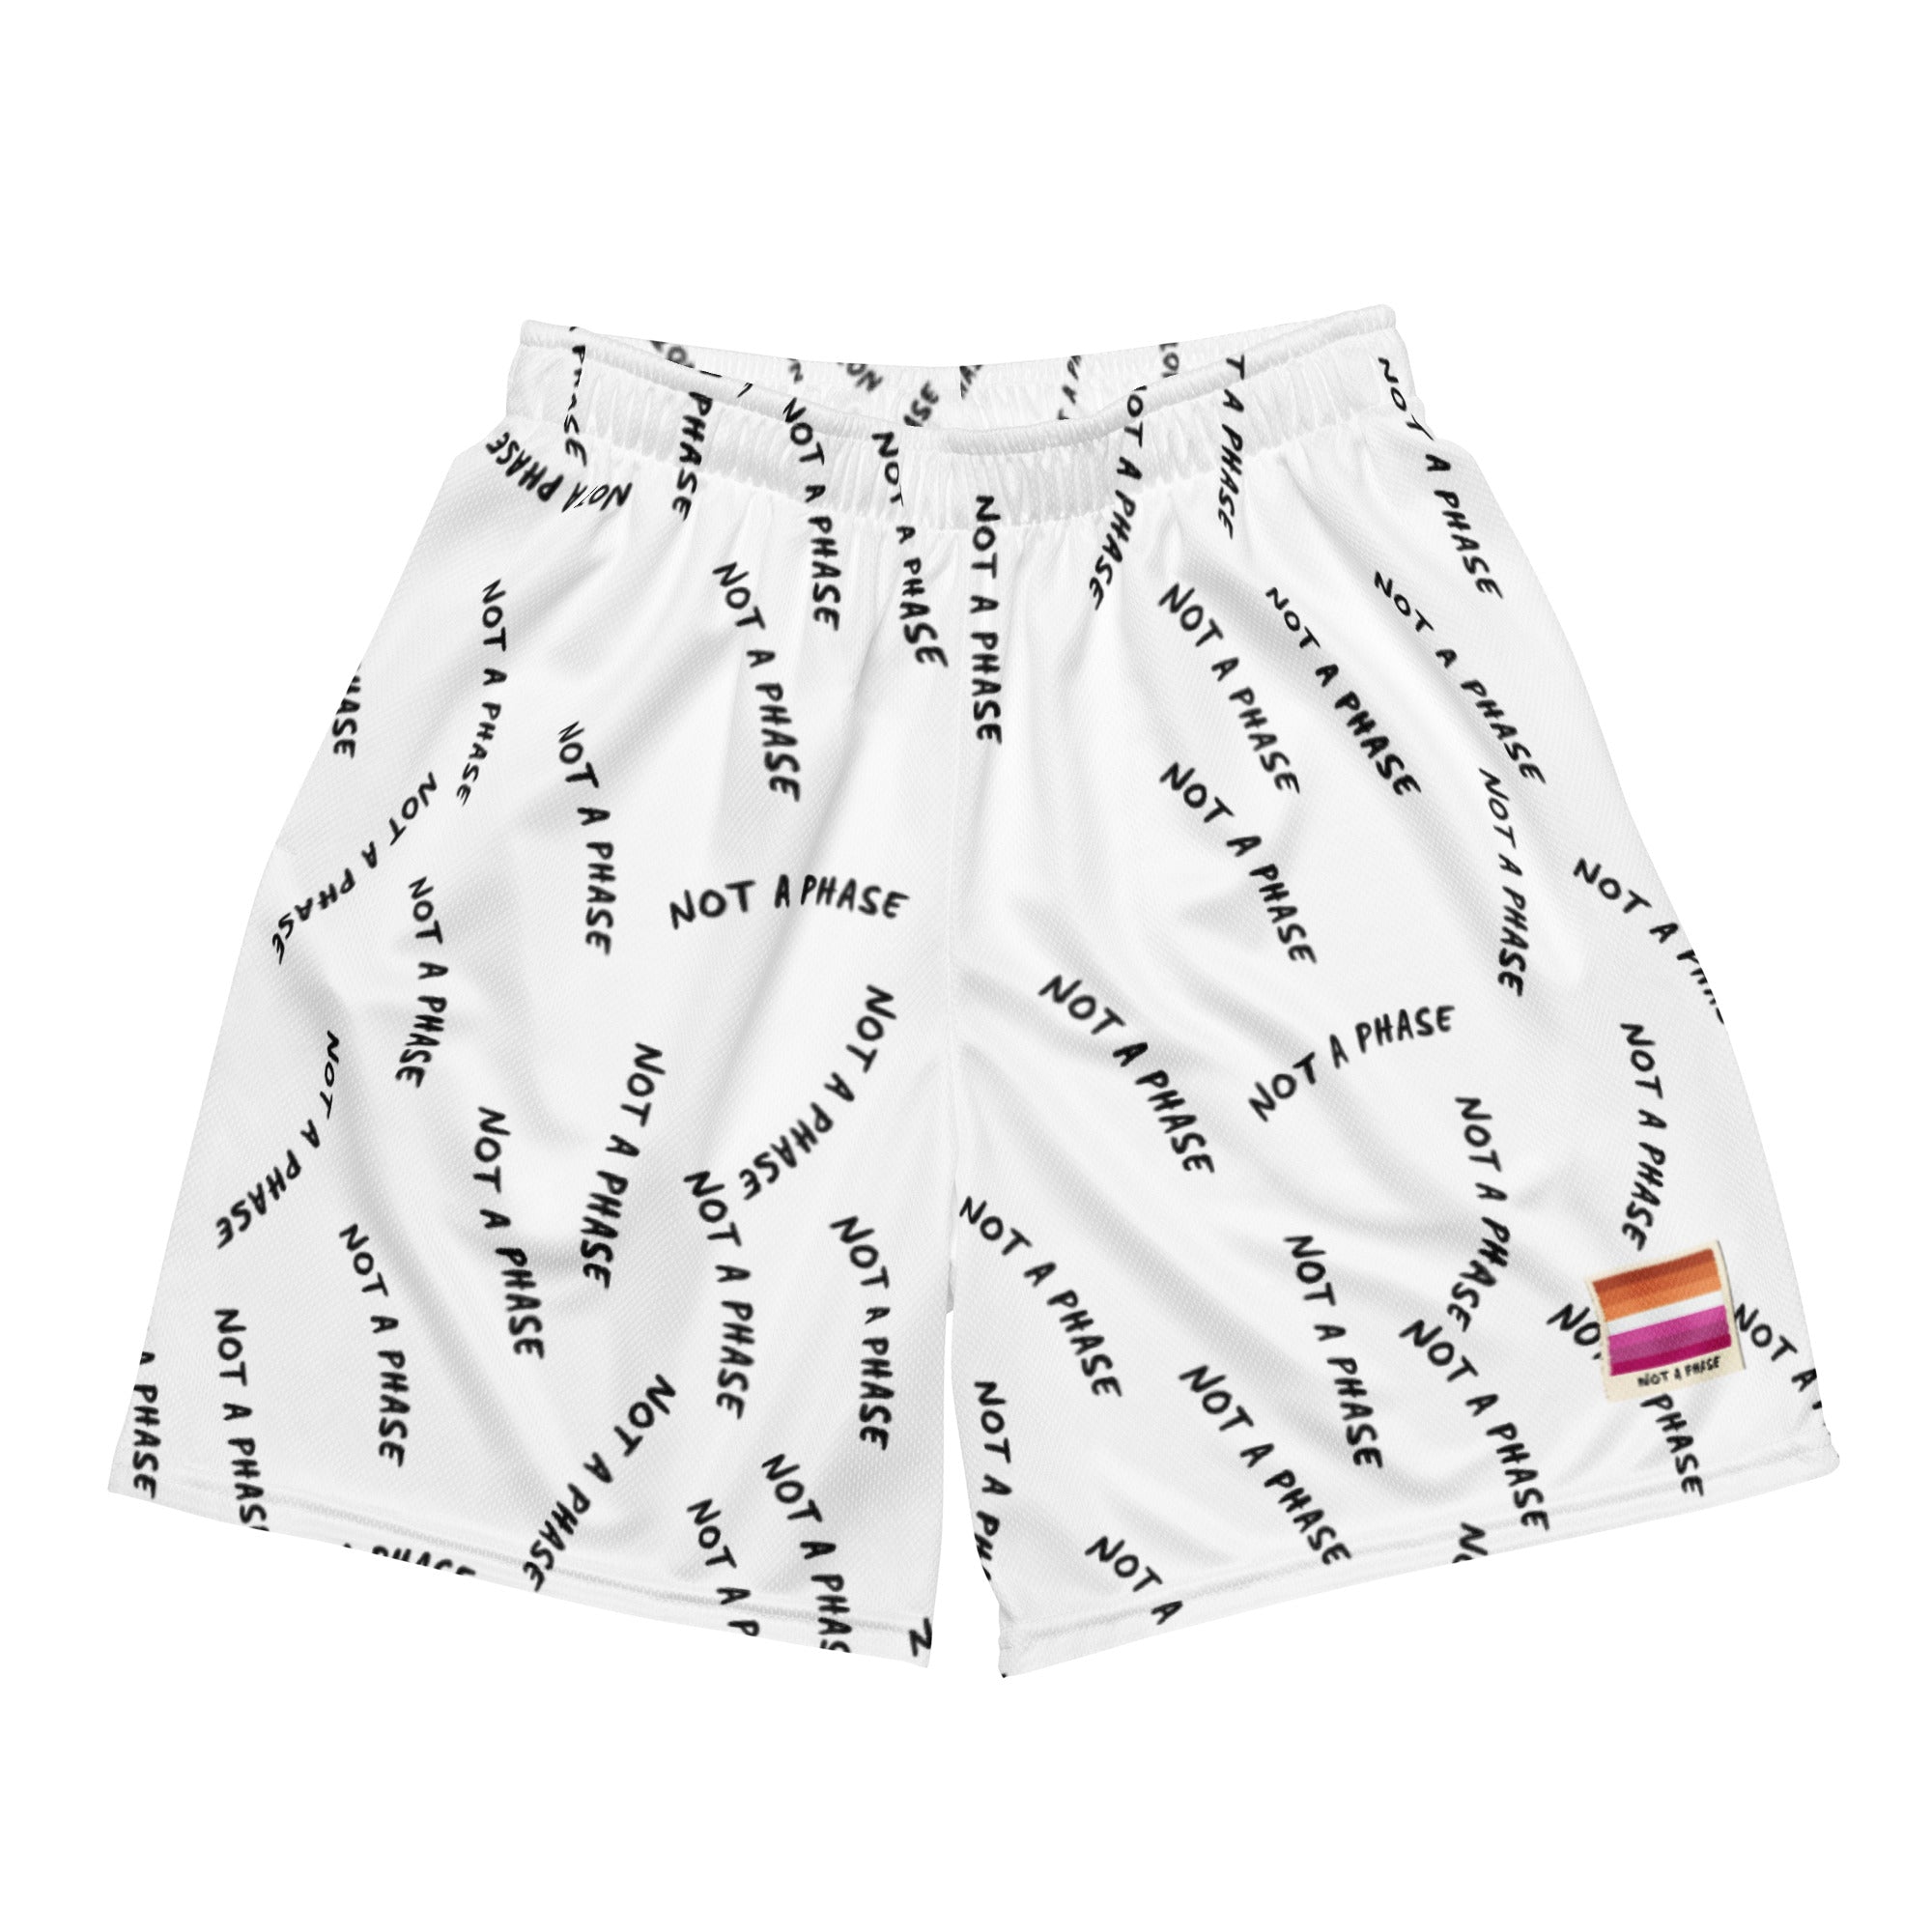 Not a Phase Lesbian WLW Pride mesh shorts